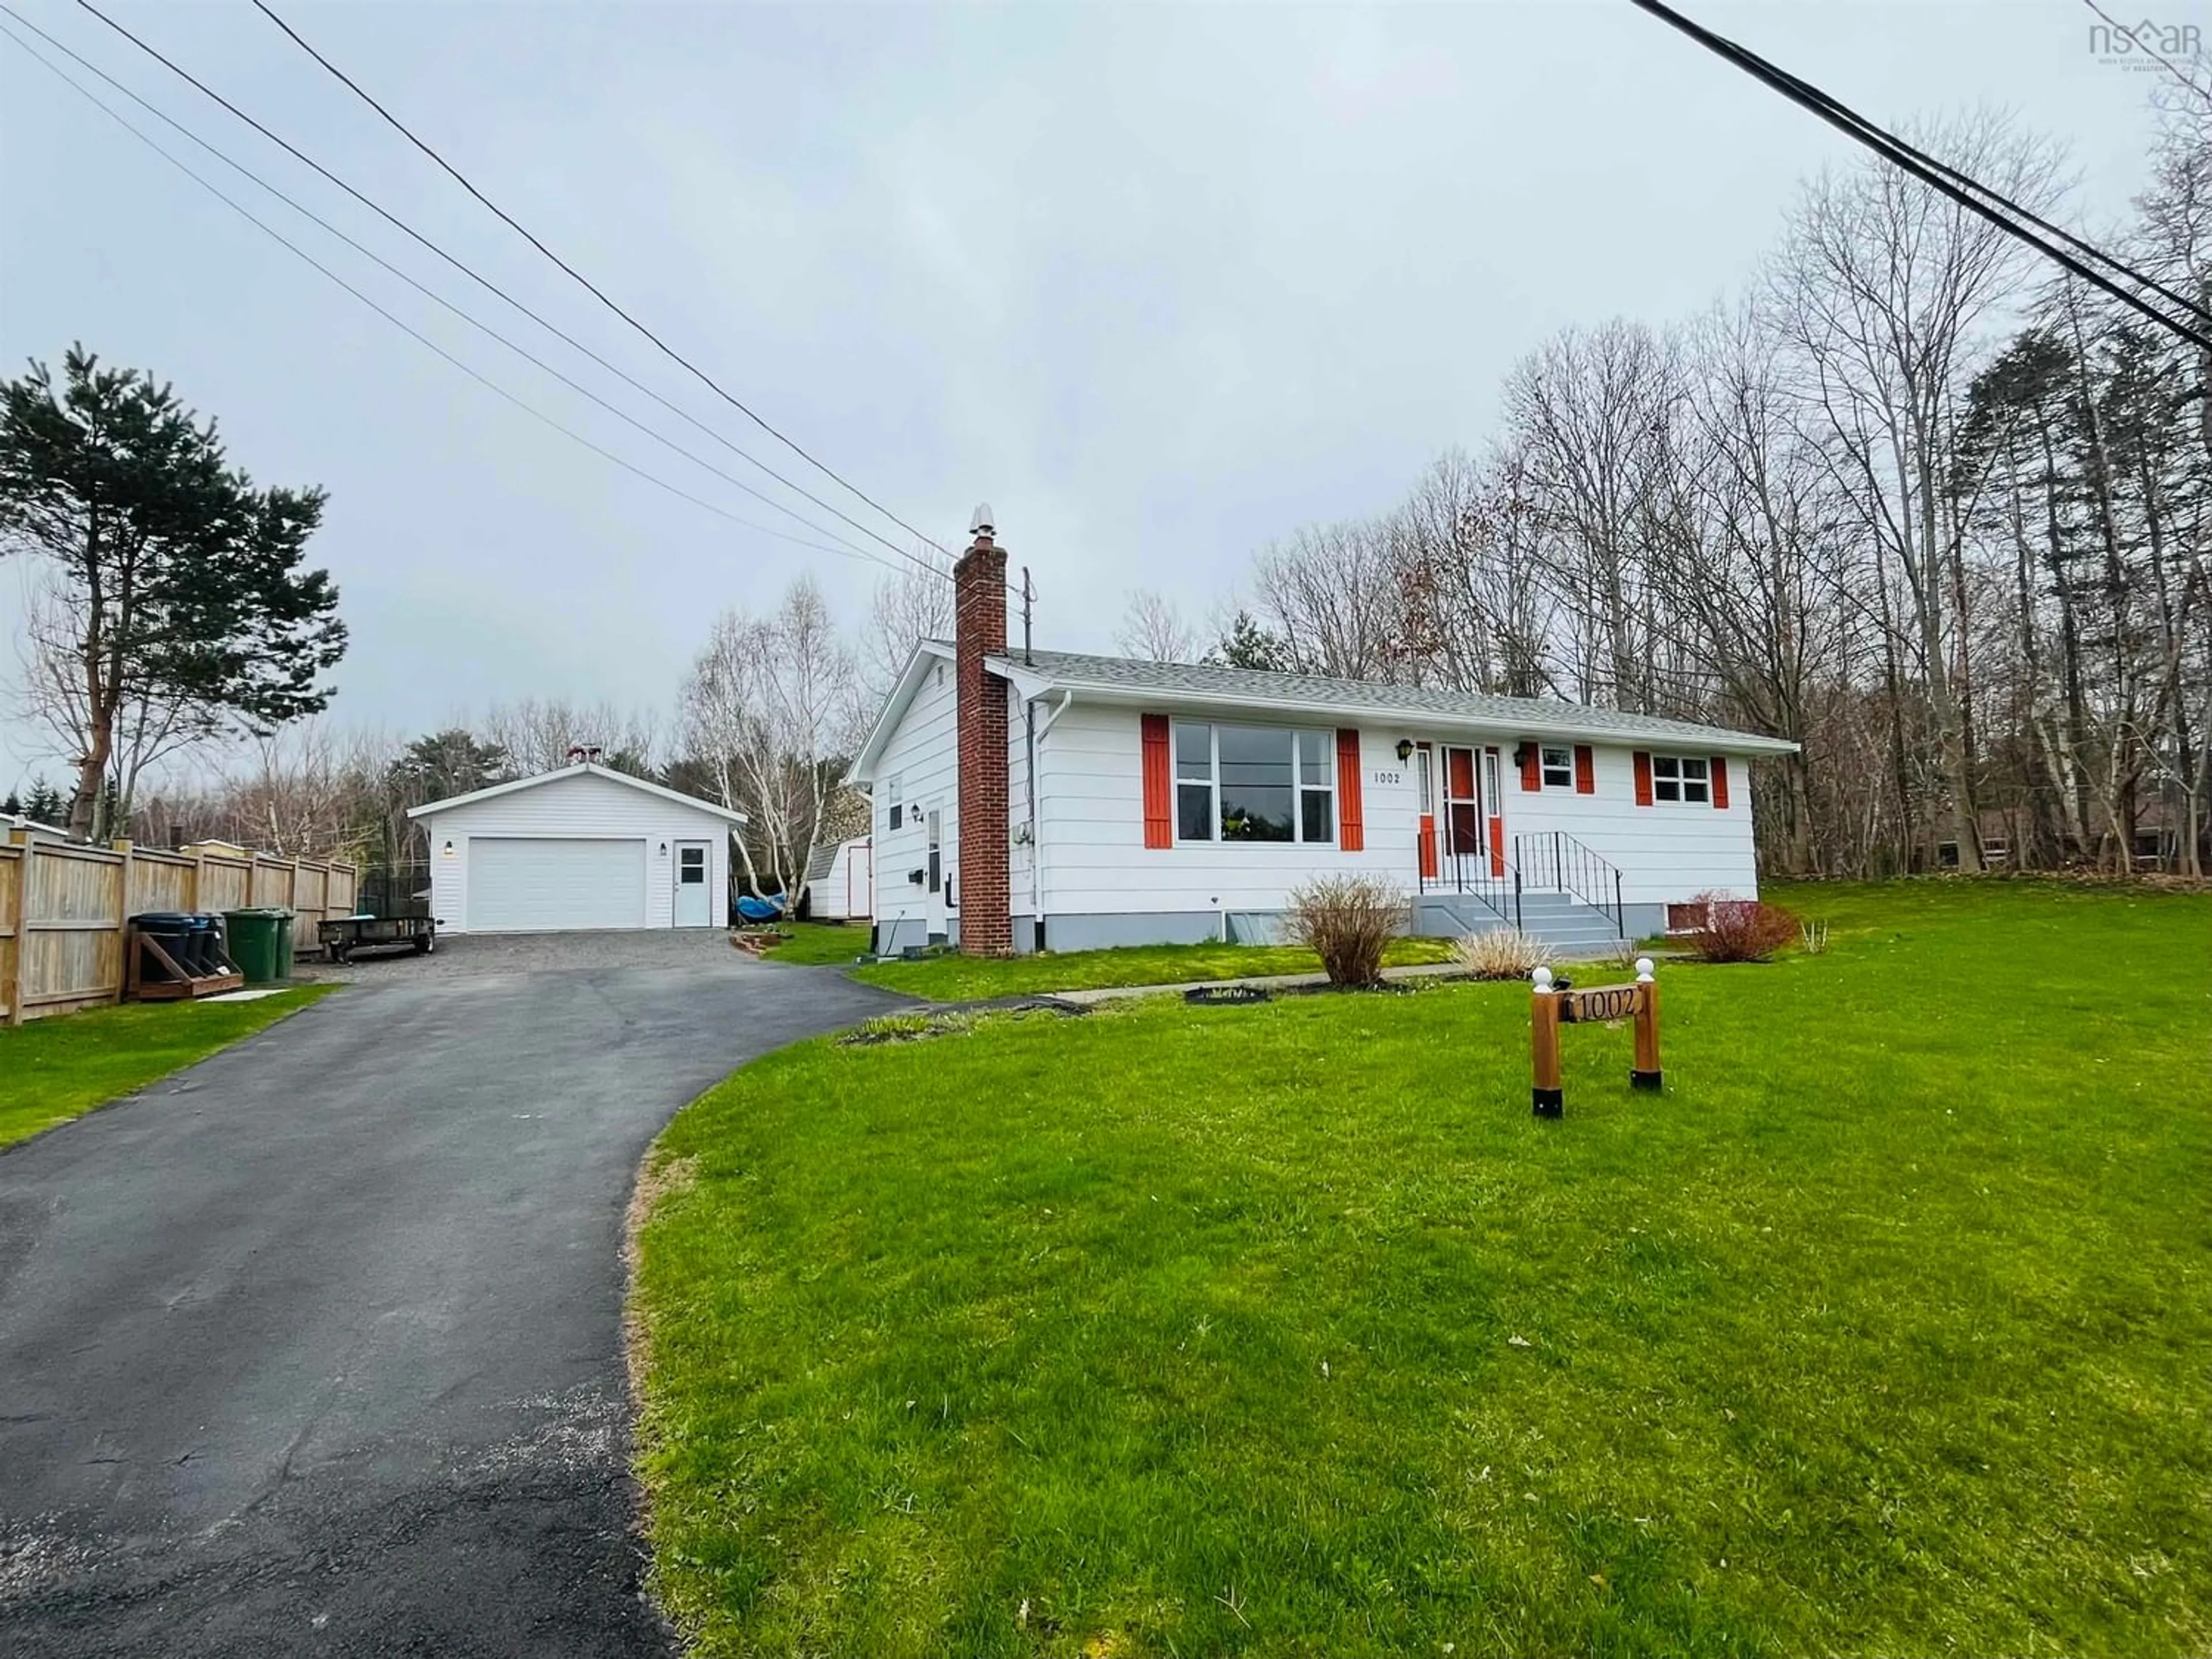 Frontside or backside of a home for 1002 Green St, New Minas Nova Scotia B4N 5L6